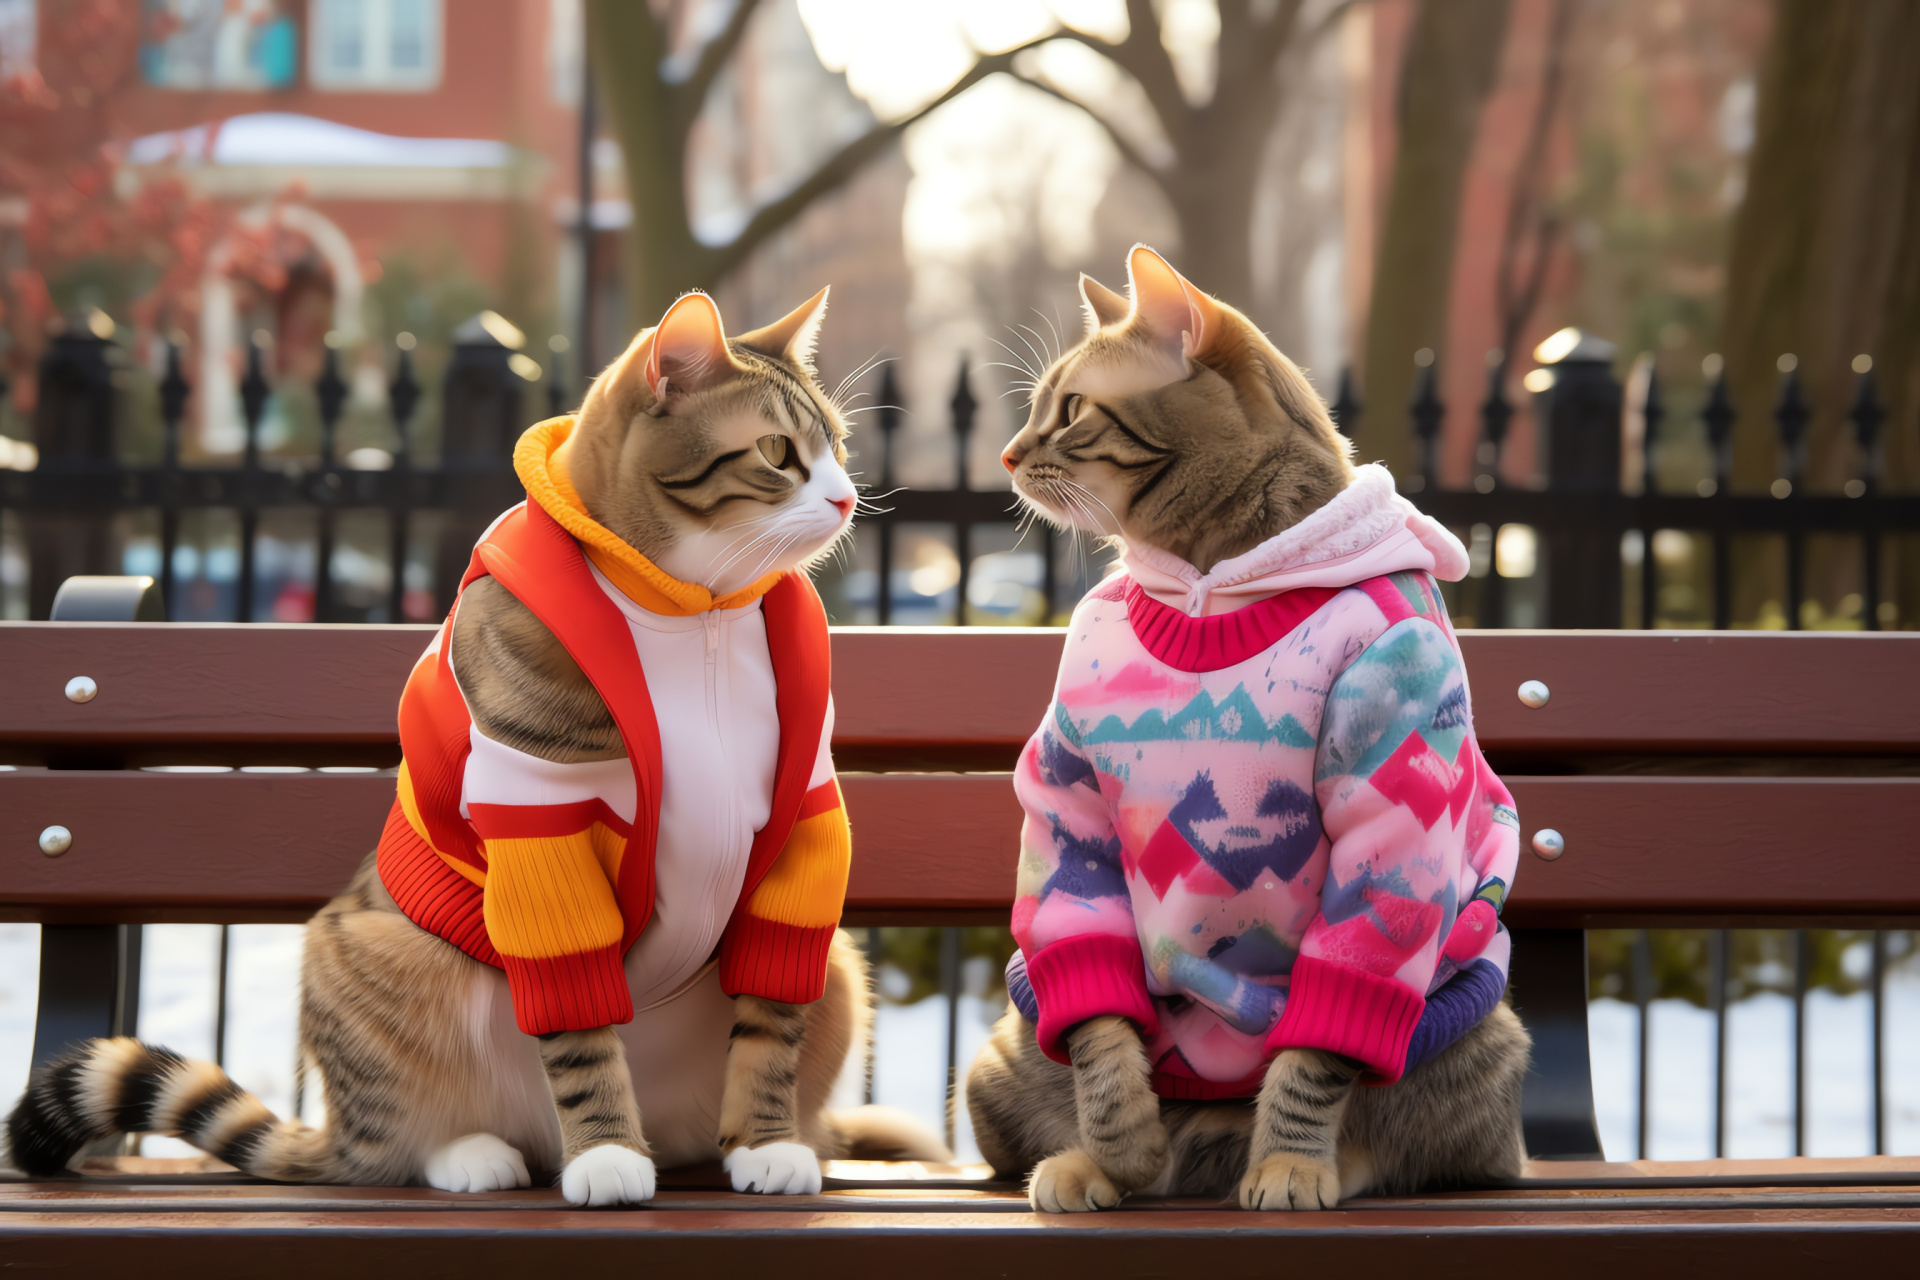 Valentine's Day cats, Park relaxation, Knitted heart patterns, Blooming flora, Serene gathering spot, HD Desktop Image